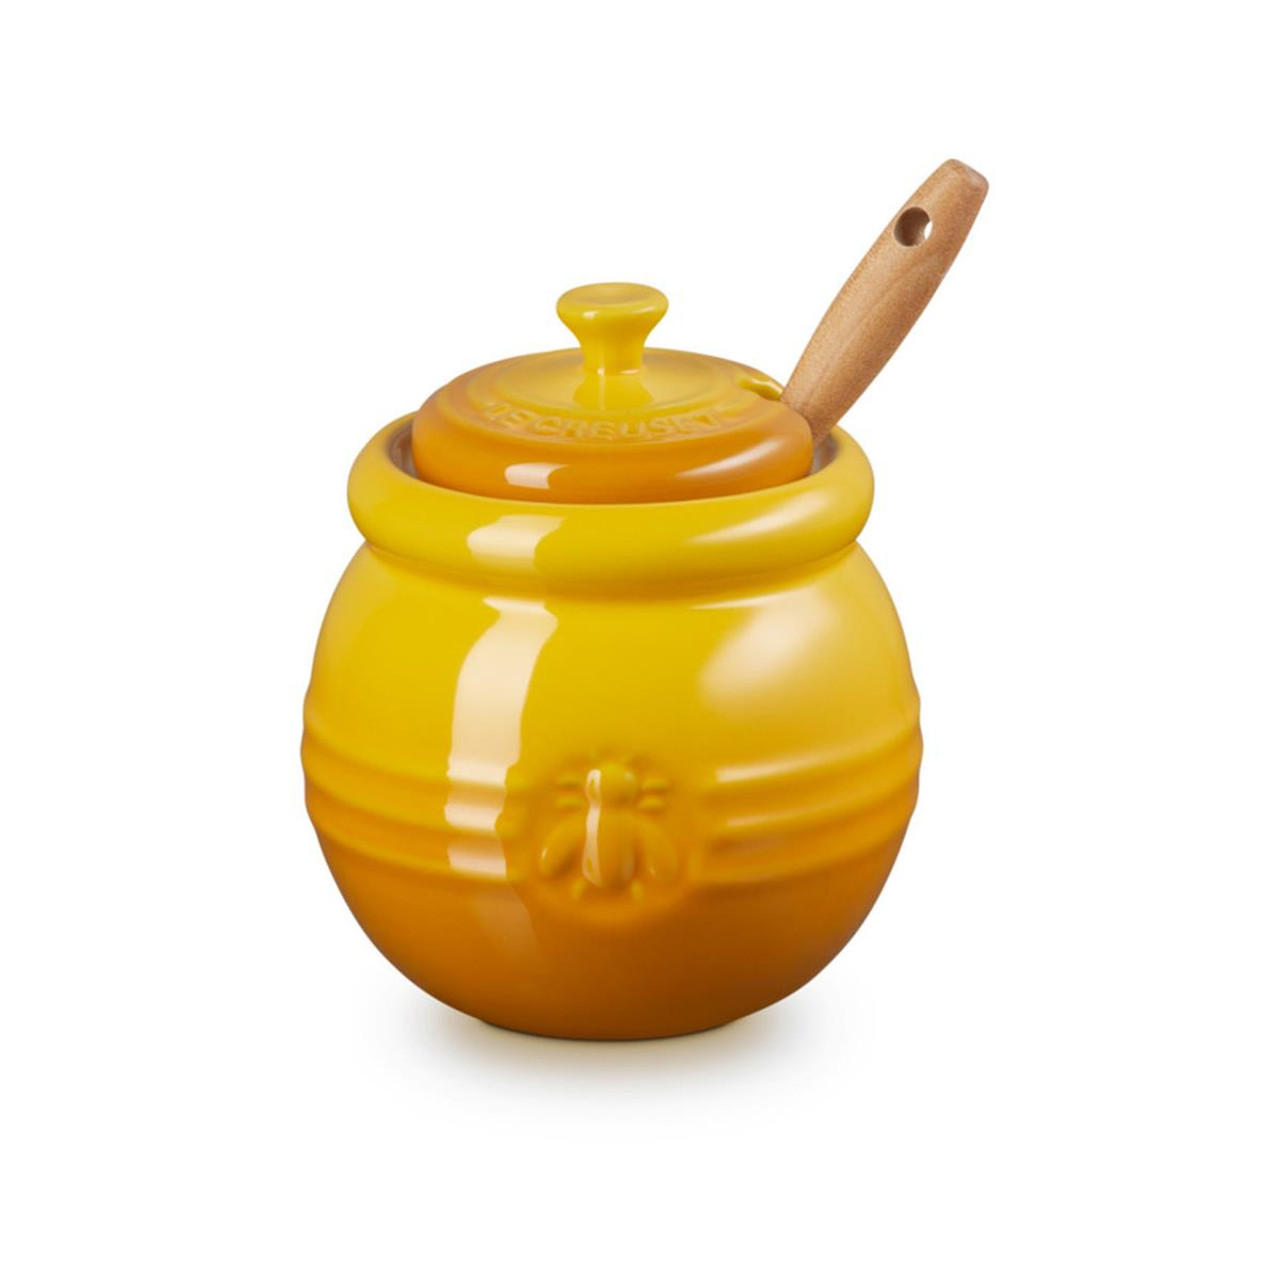 How easy is it to clean the Le Creuset honey pot?